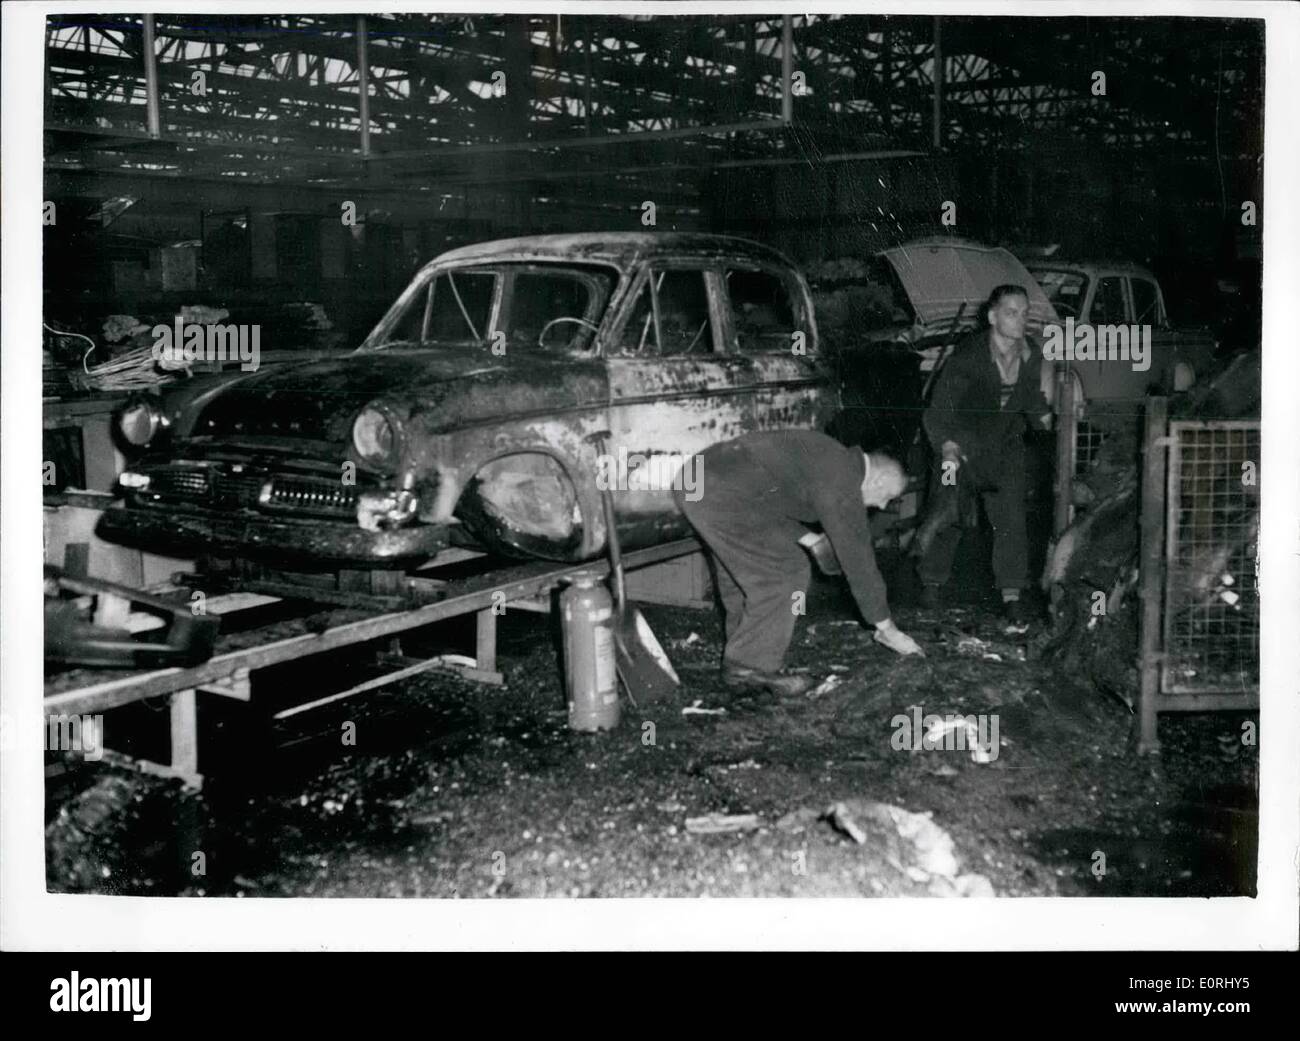 Sep. 23, 1959 - 23-9-59 Fire causes heavy damage at Rootes Car Factory. Fire which broke out at the Rootes factory, near Coventry last night caused widespread damage. It took firemen three hours, pumping 100 gallons of water a minute, before the blaze was got under control. Warwickshire Fire Brigade said it was the biggest blaze they had ever had to tackle. Keystone Photo Shows: Damaged cars on the assembly line as clearing up progresses after the fire at the factory. Stock Photo